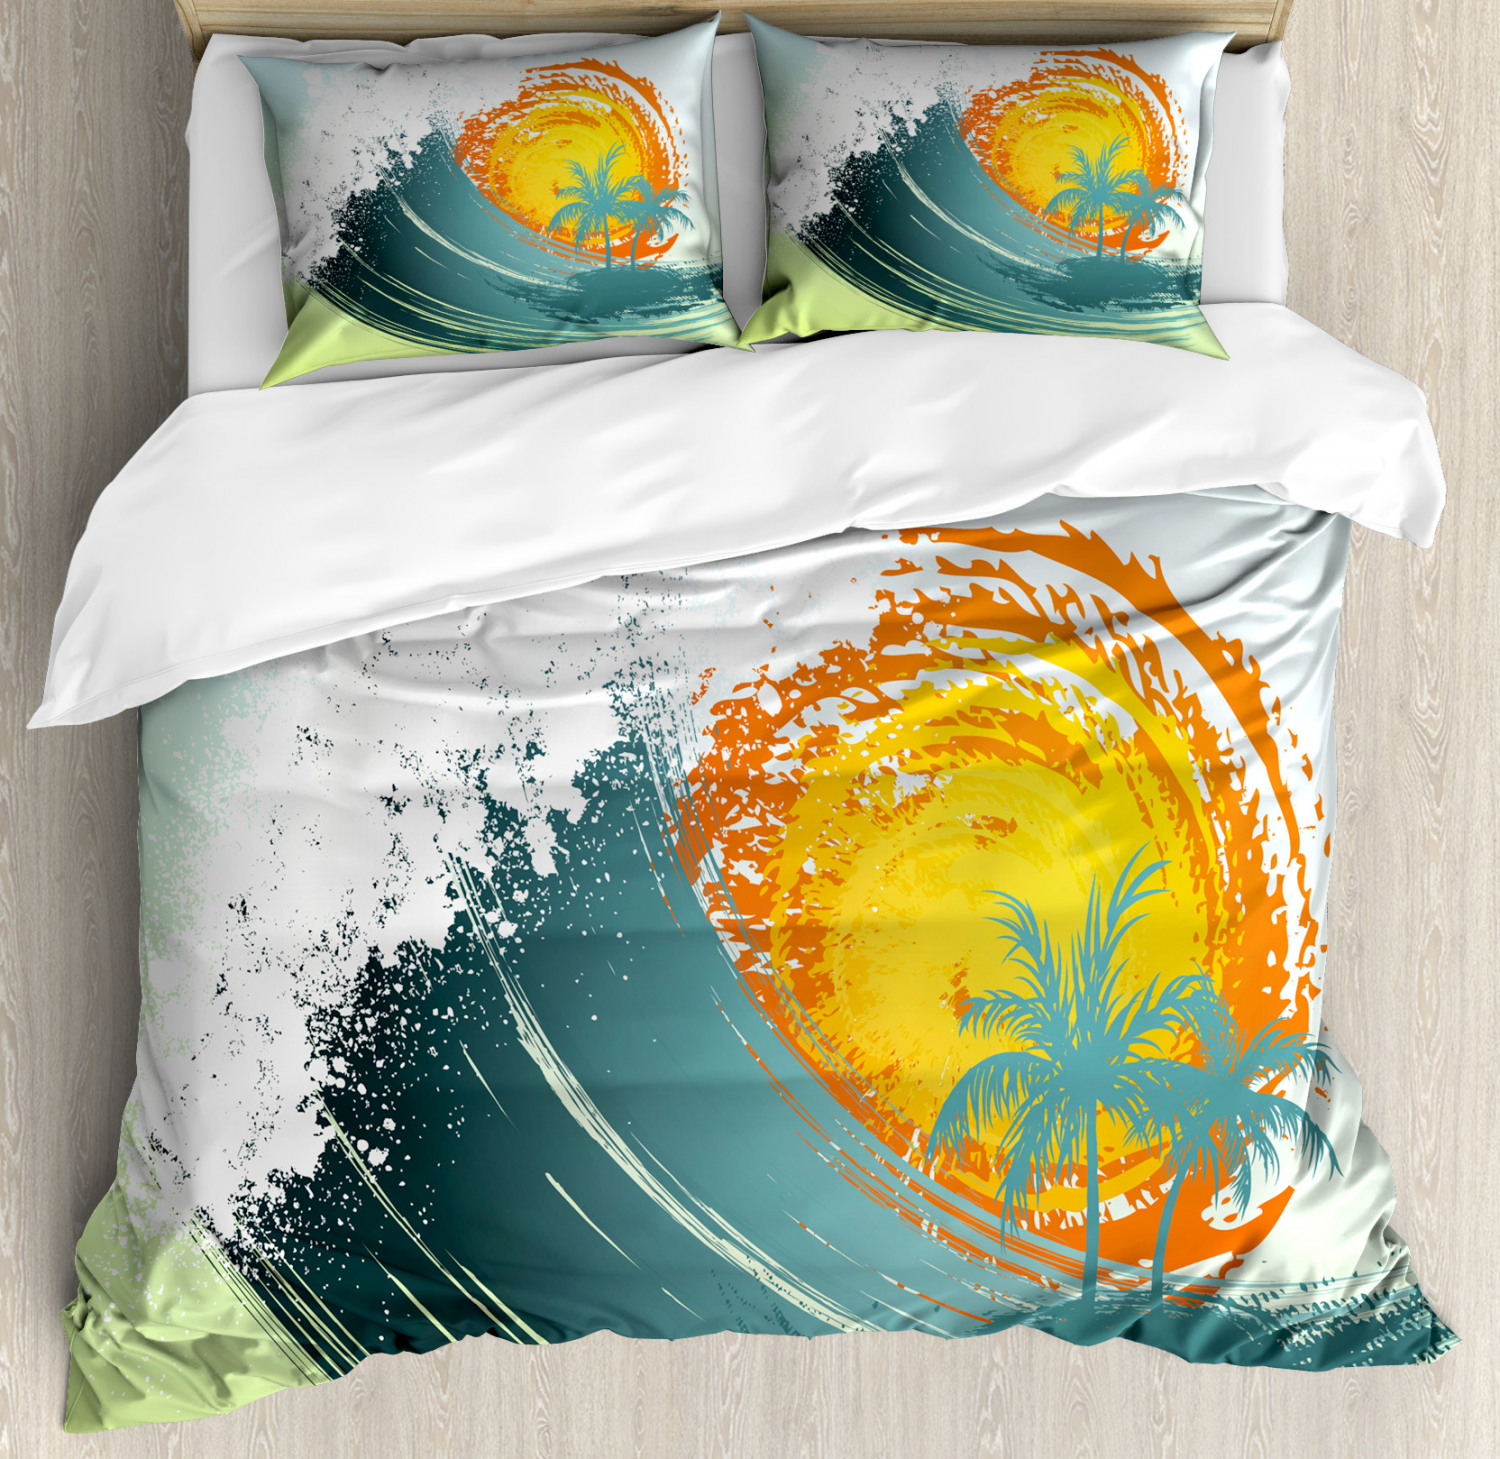 Tropical Duvet Cover Set With Pillow Shams Coconut Palm Trees